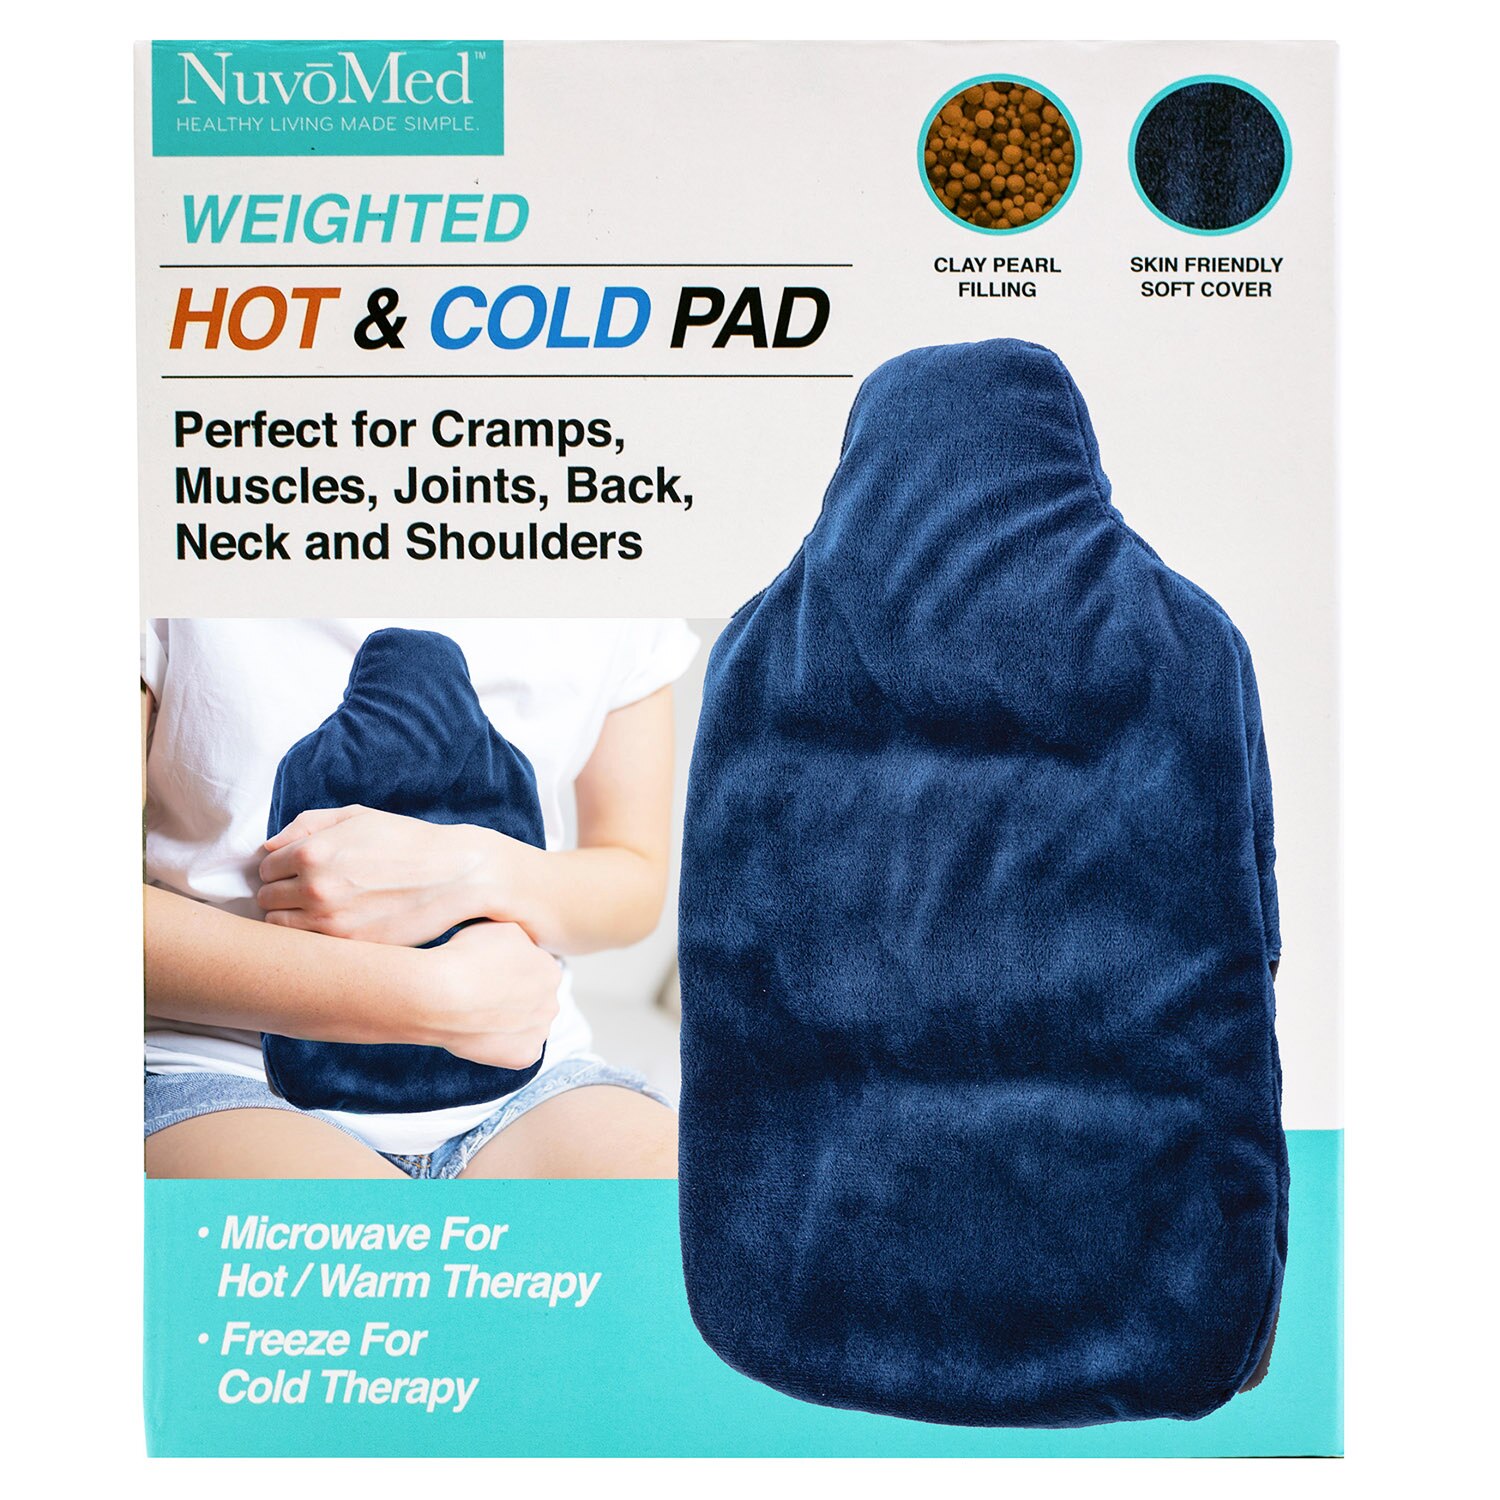 Nuvomed Weighted Hot & Cold Pad